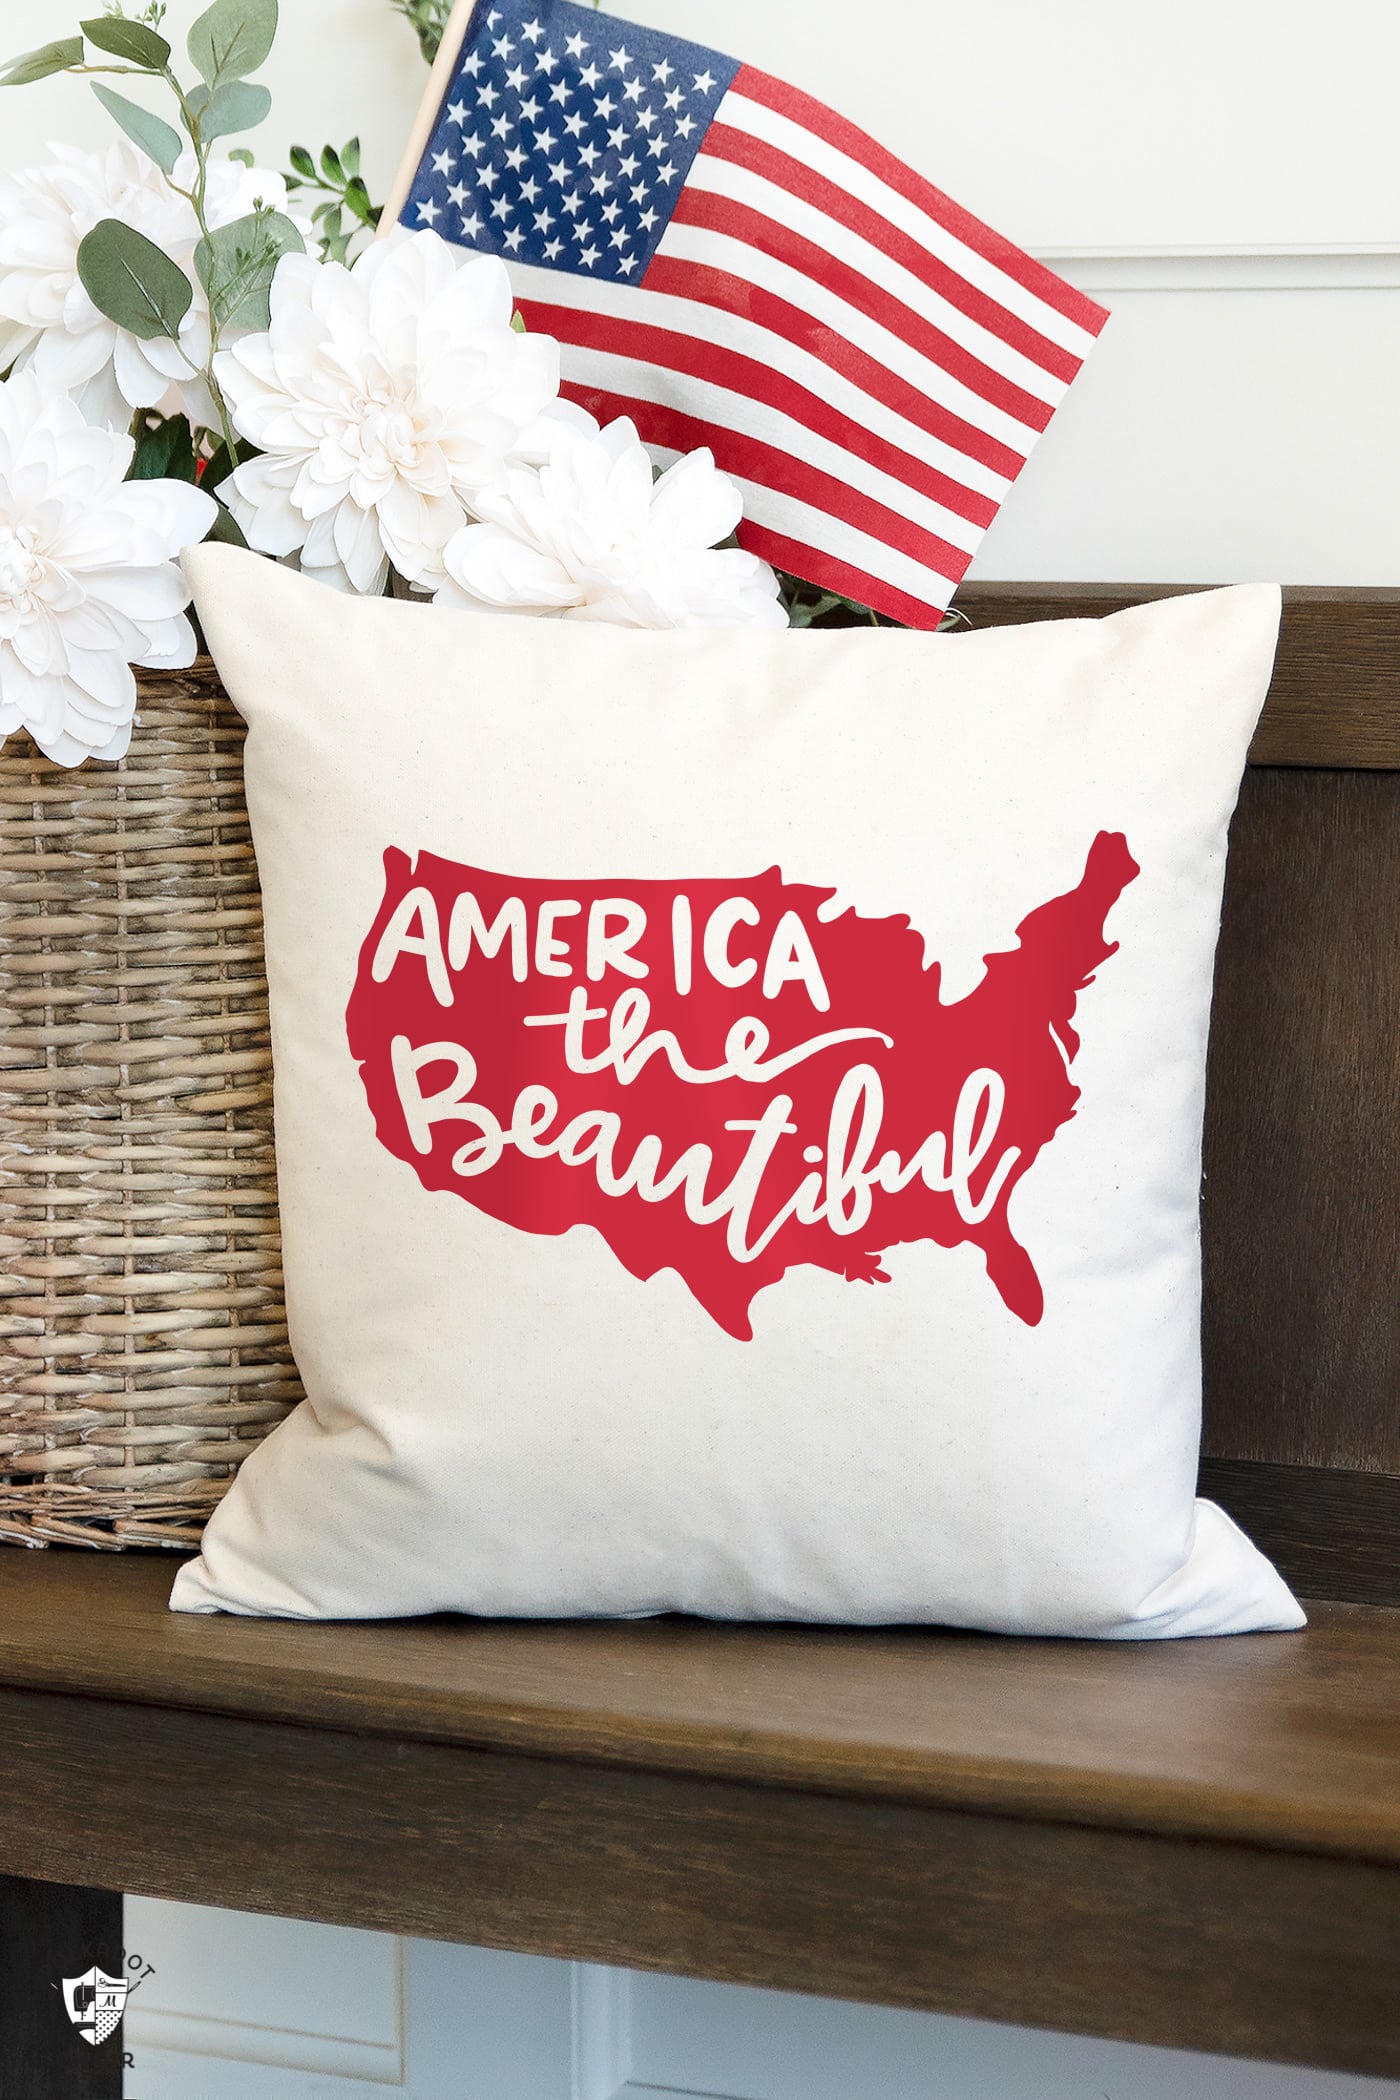 Patriotic pillow on wood bench with american flags and flowers